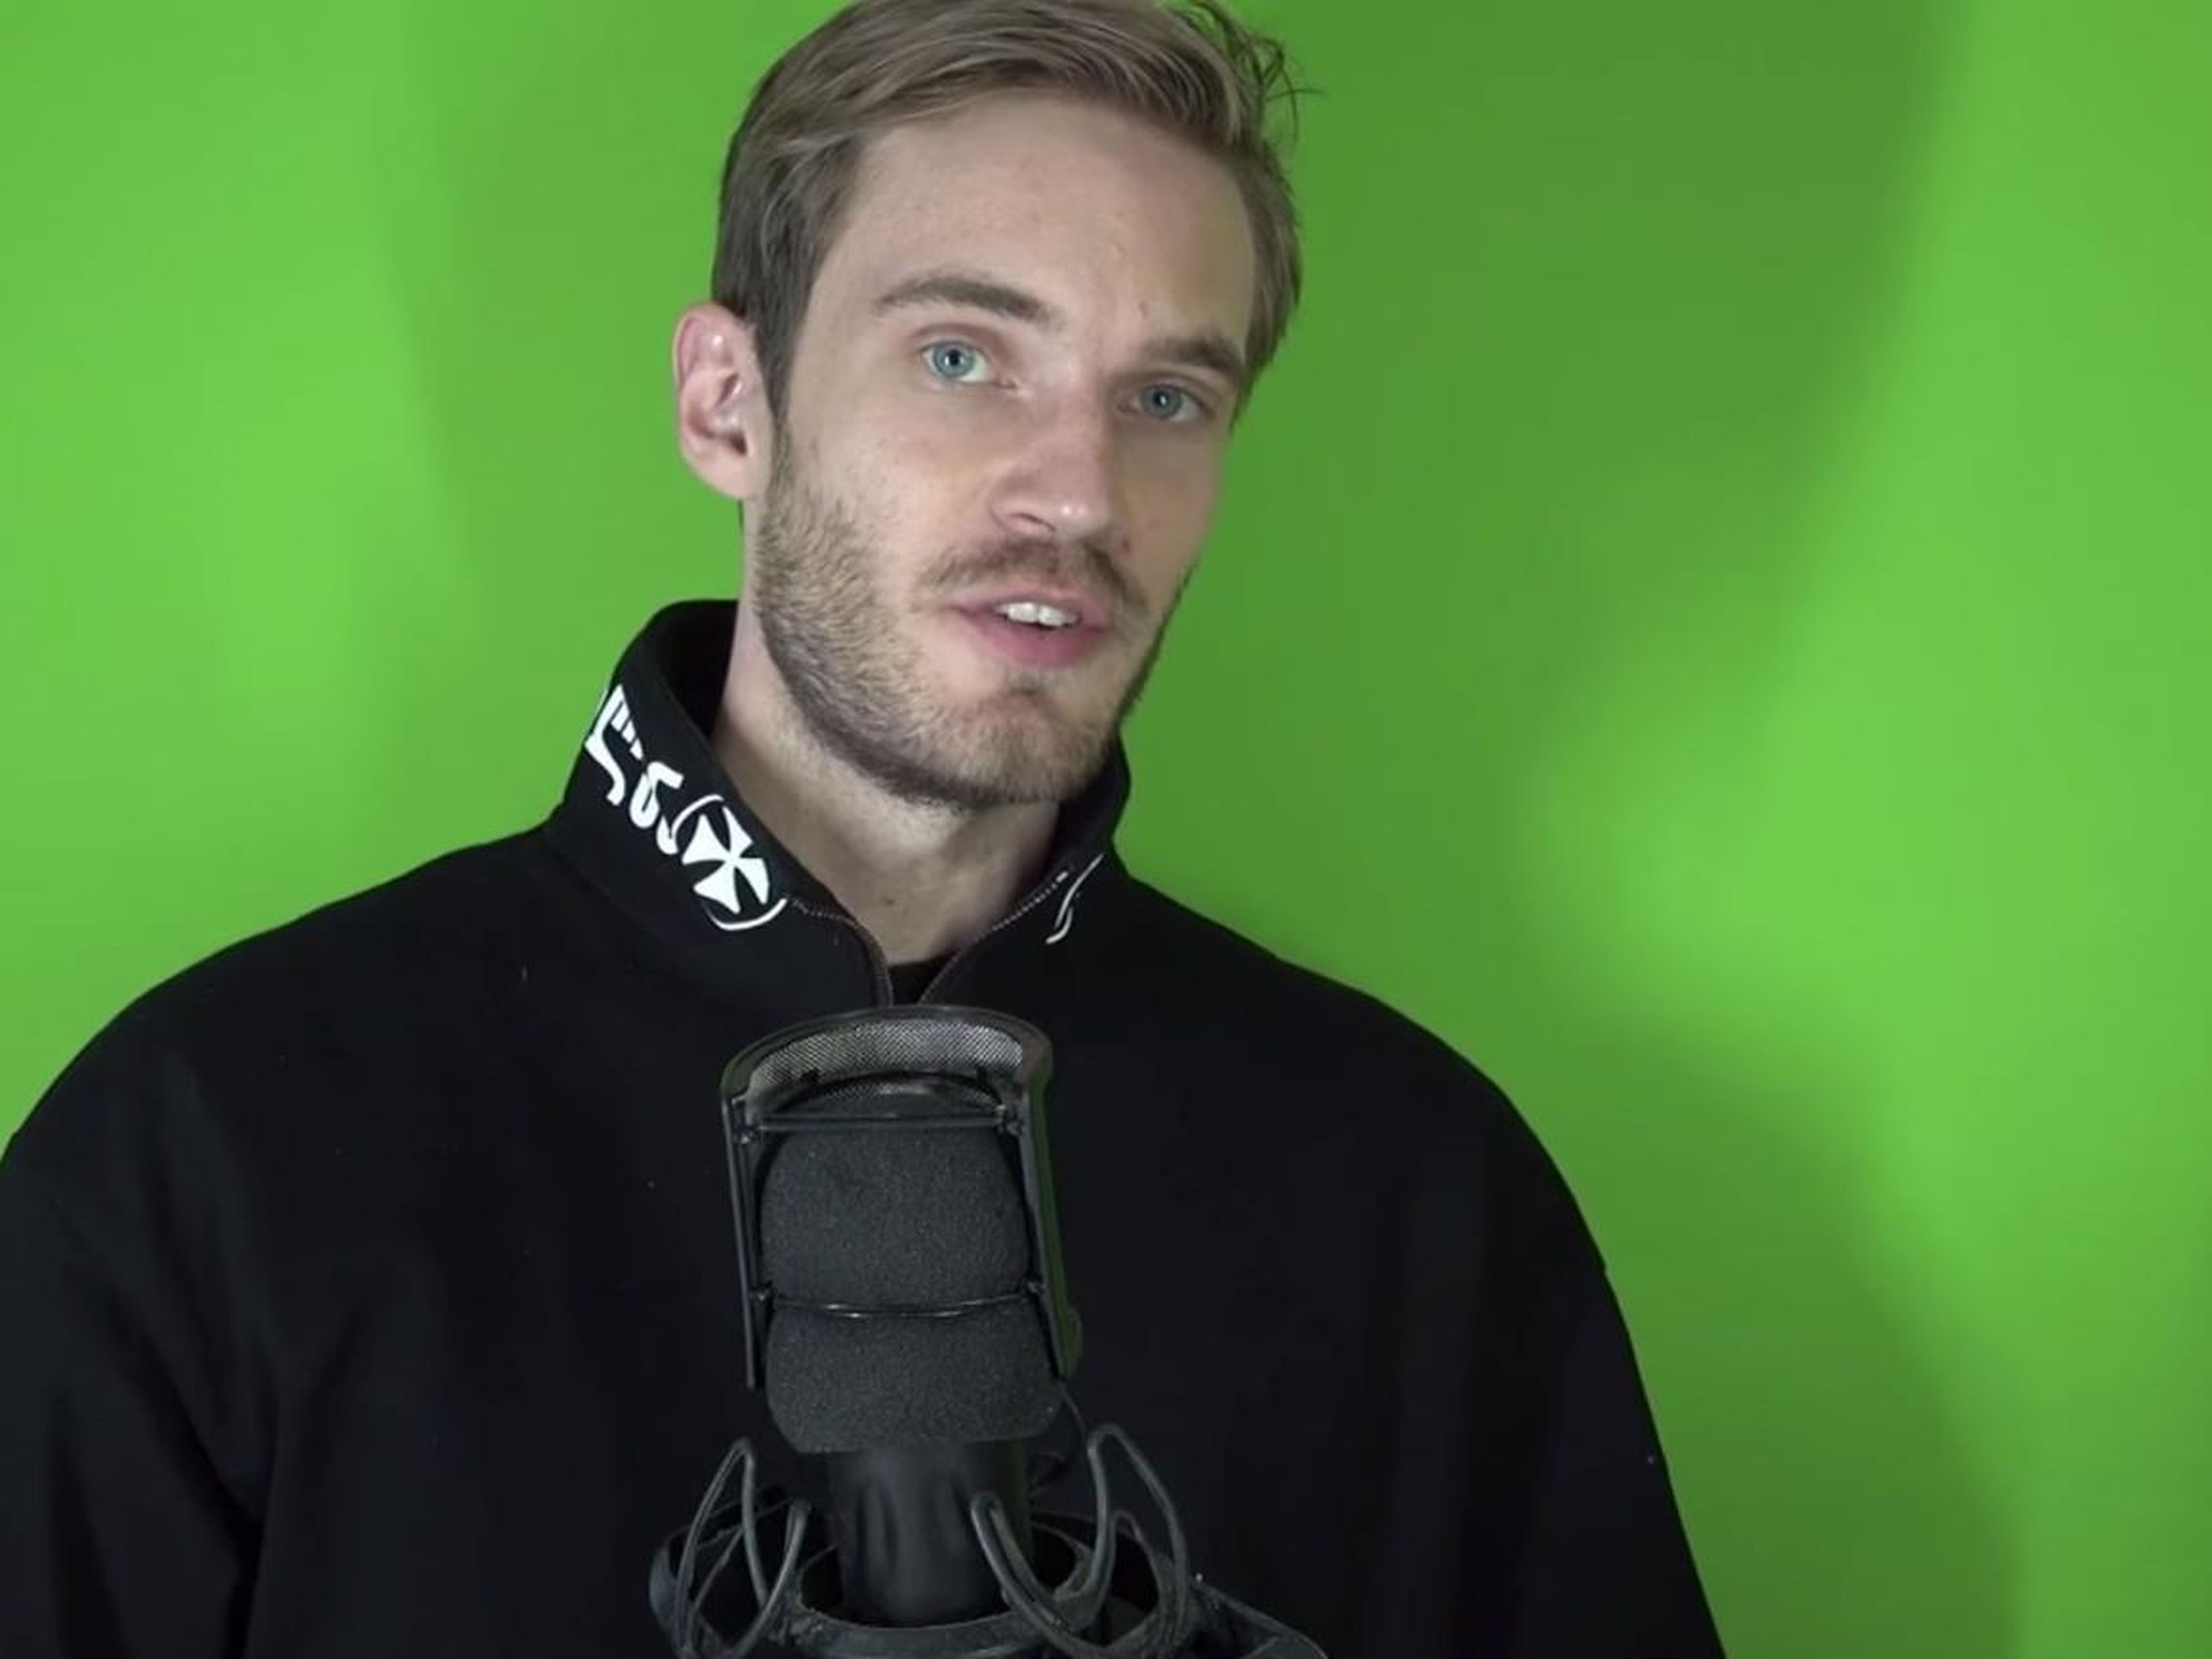 However, Kjellberg's announcement was met with condemnation from fans, who questioned why the YouTuber was donating to a group that had previously spoken out against him. Just a day later, Kjellberg walked back on his $50,000